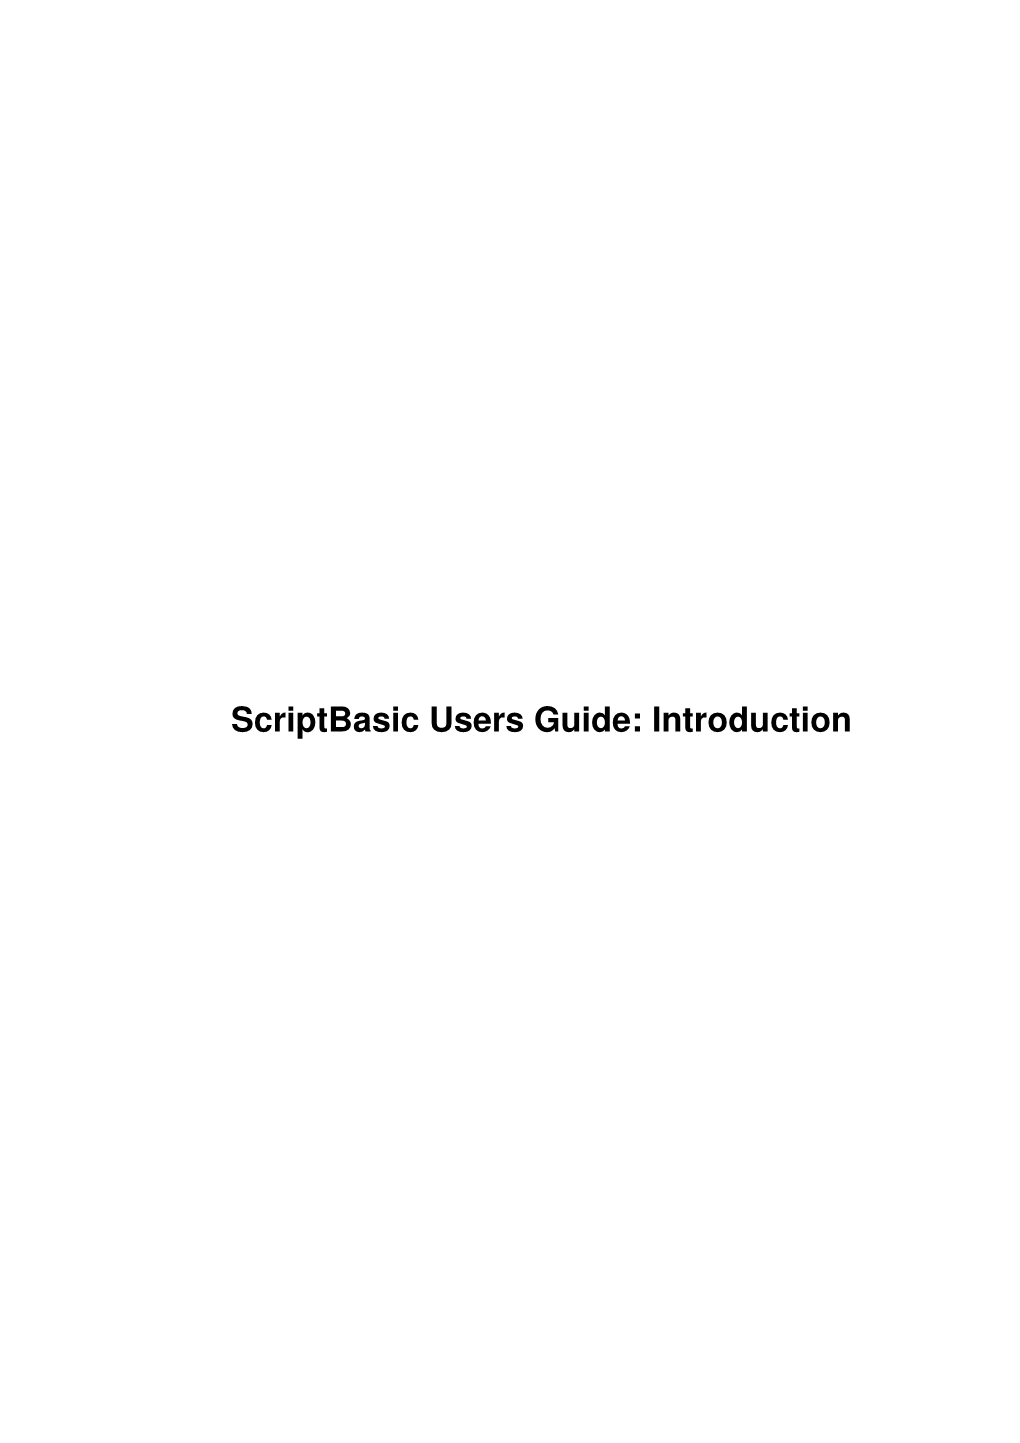 Scriptbasic Users Guide: Introduction